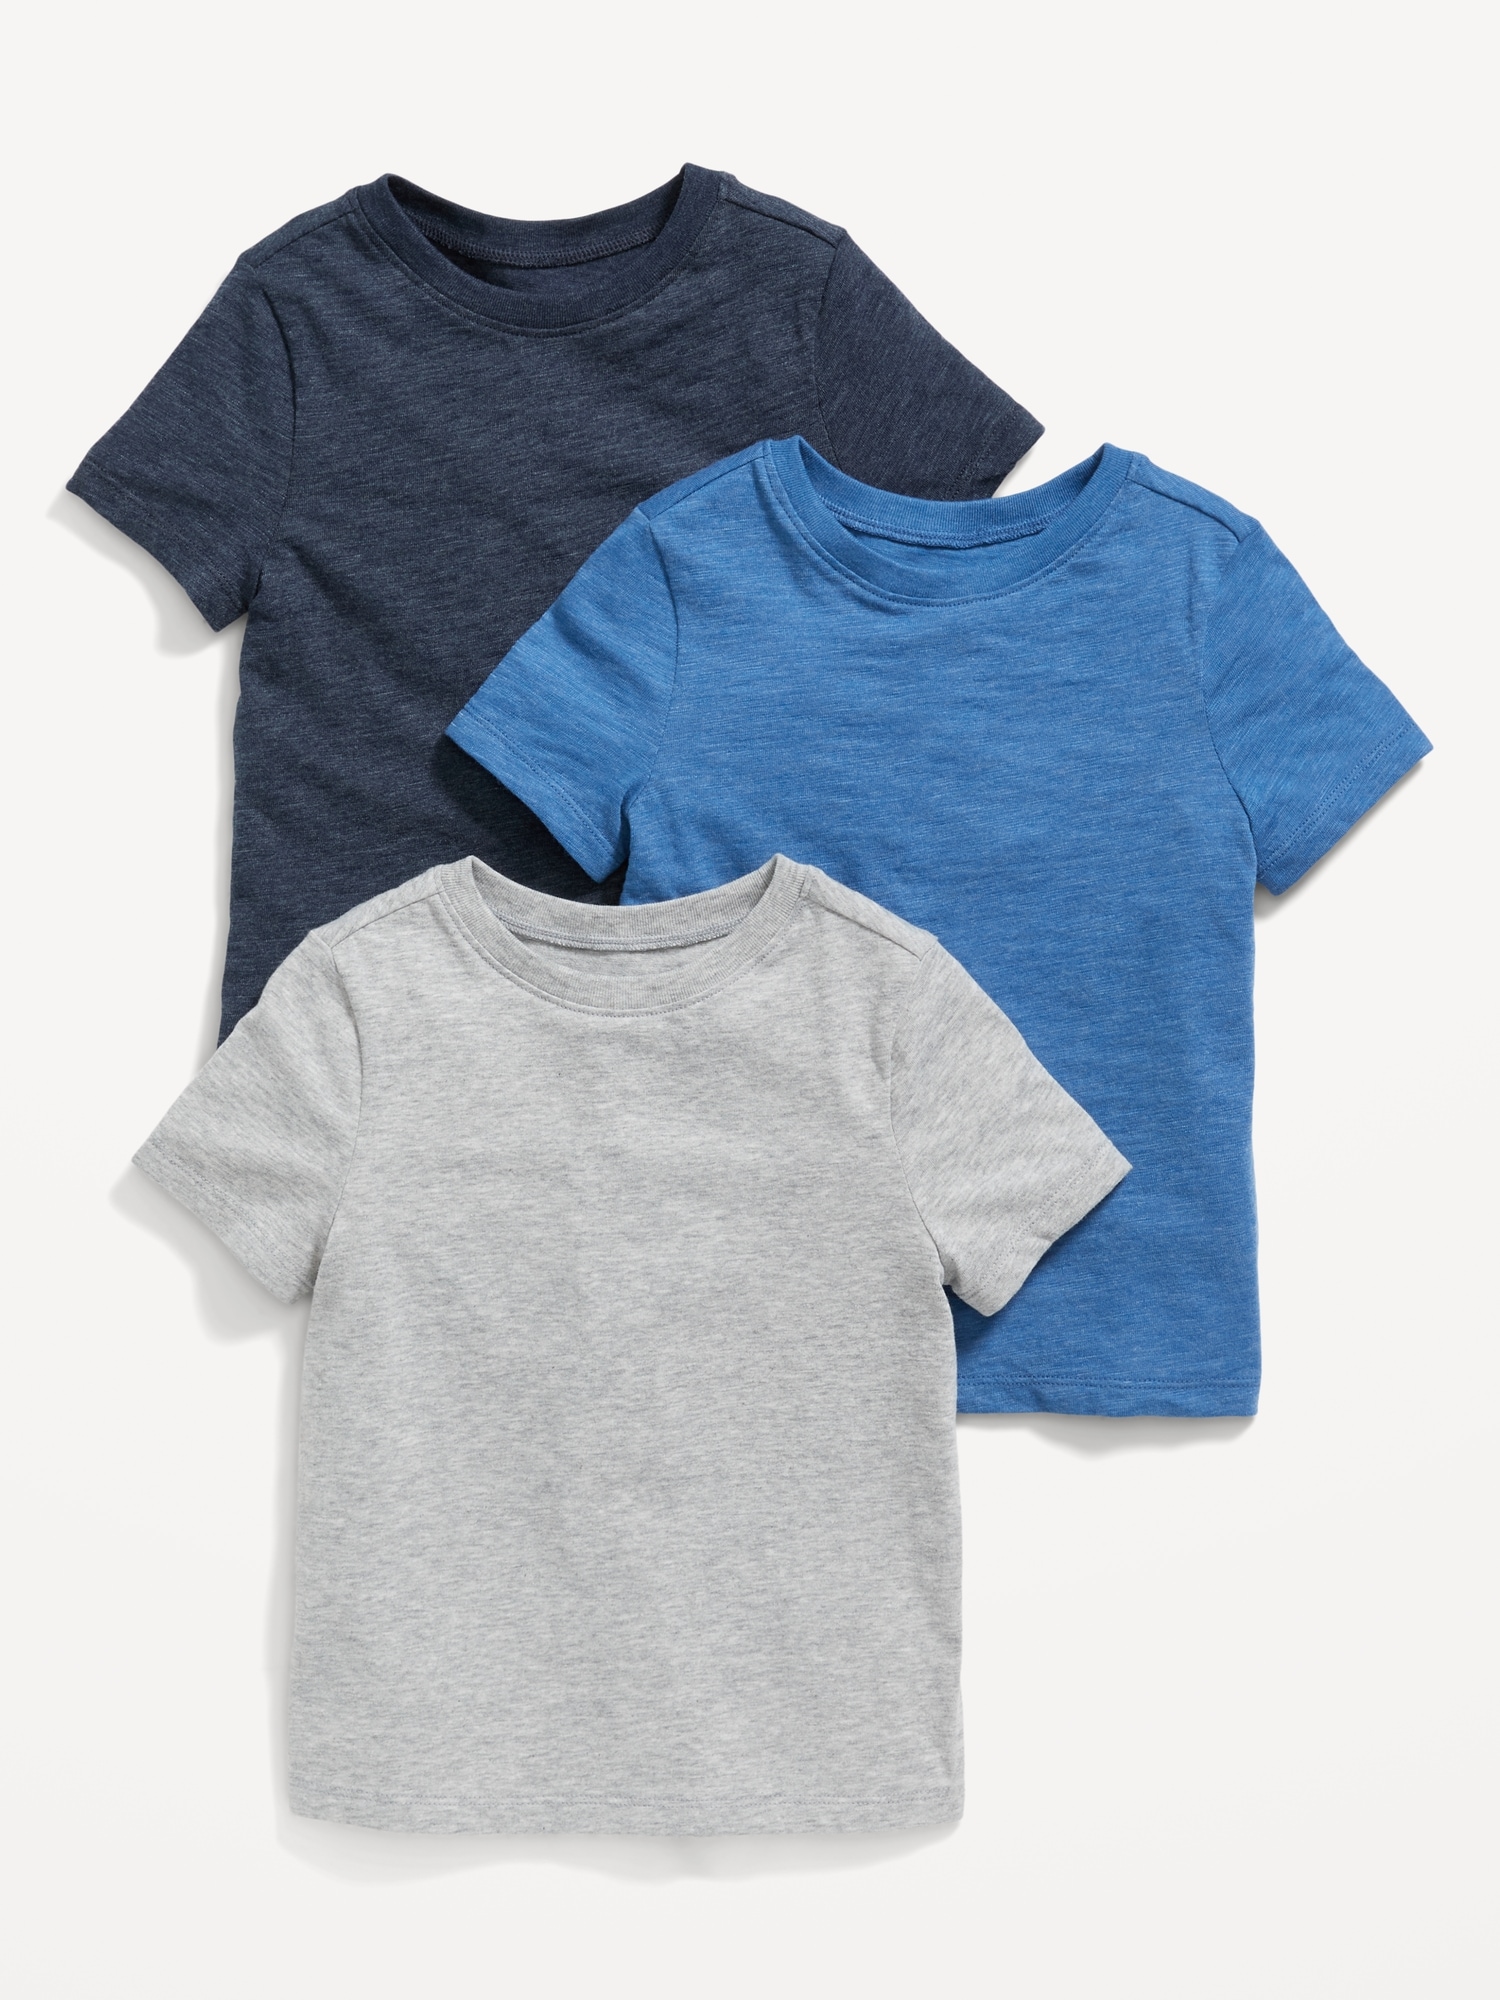 Basic T-Shirts for Kids | Old Navy | T-Shirts